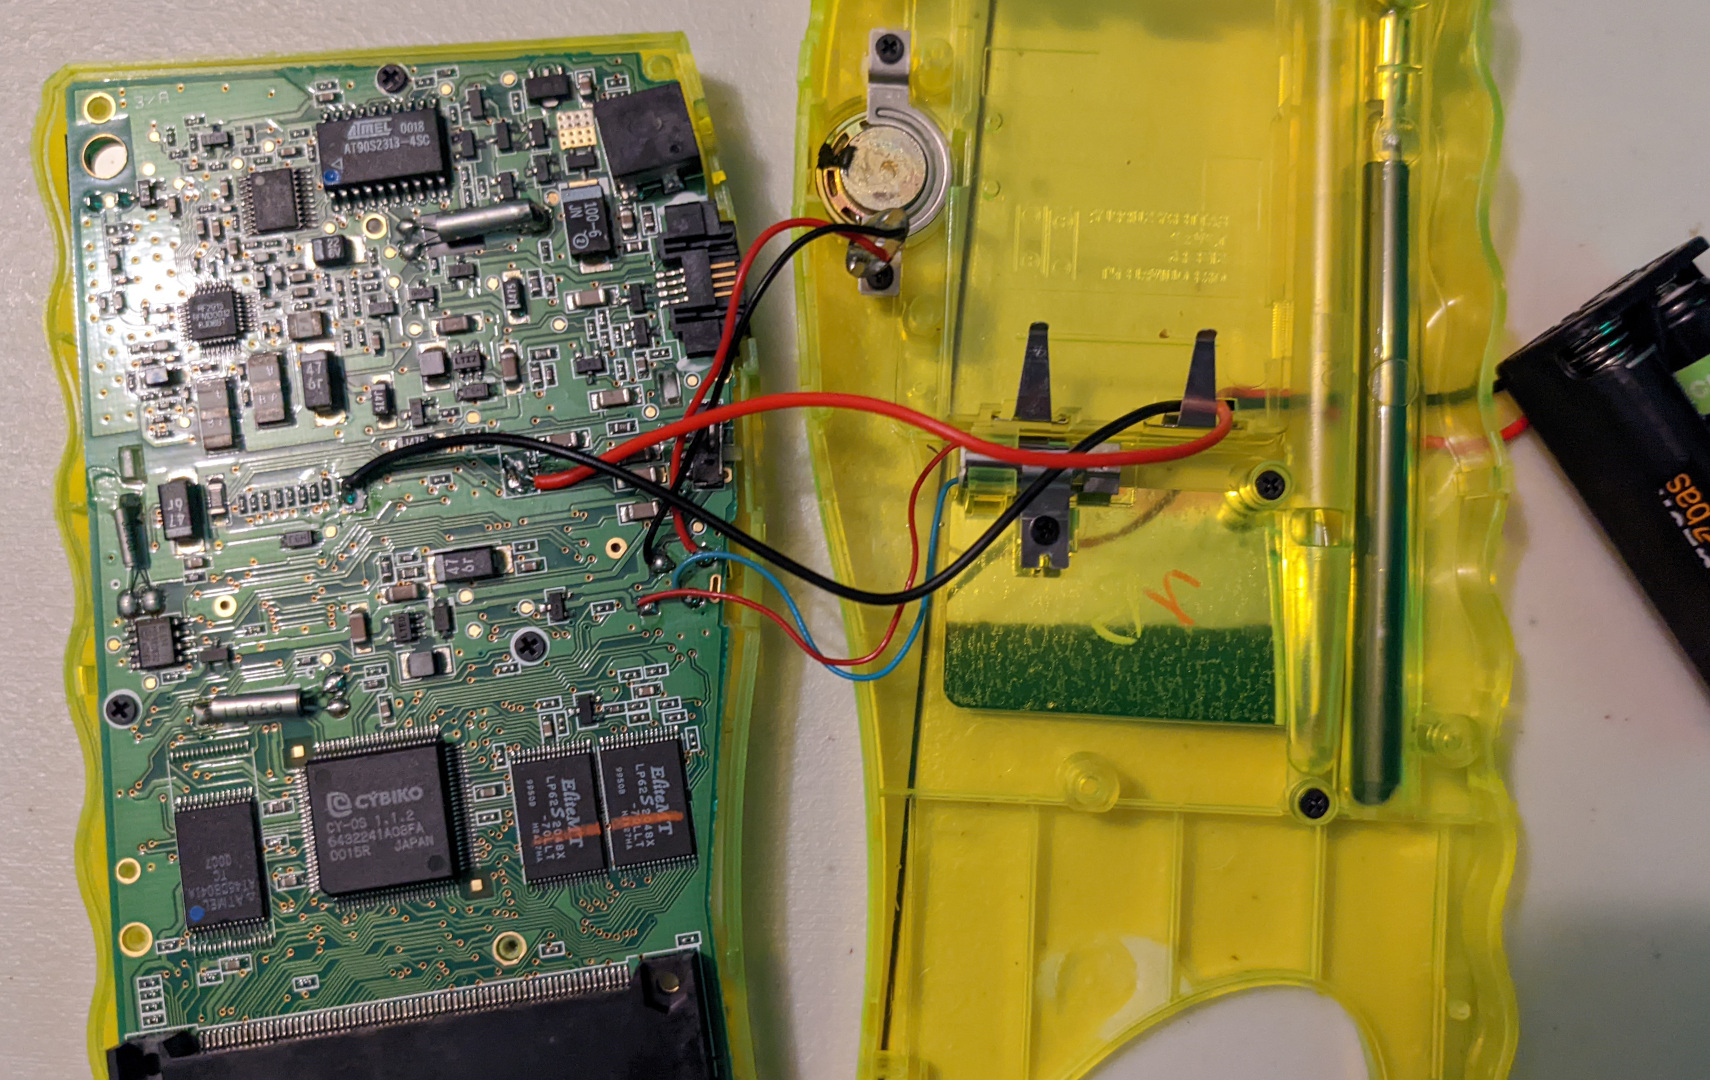 external battery compartment wiring to Cybiko board